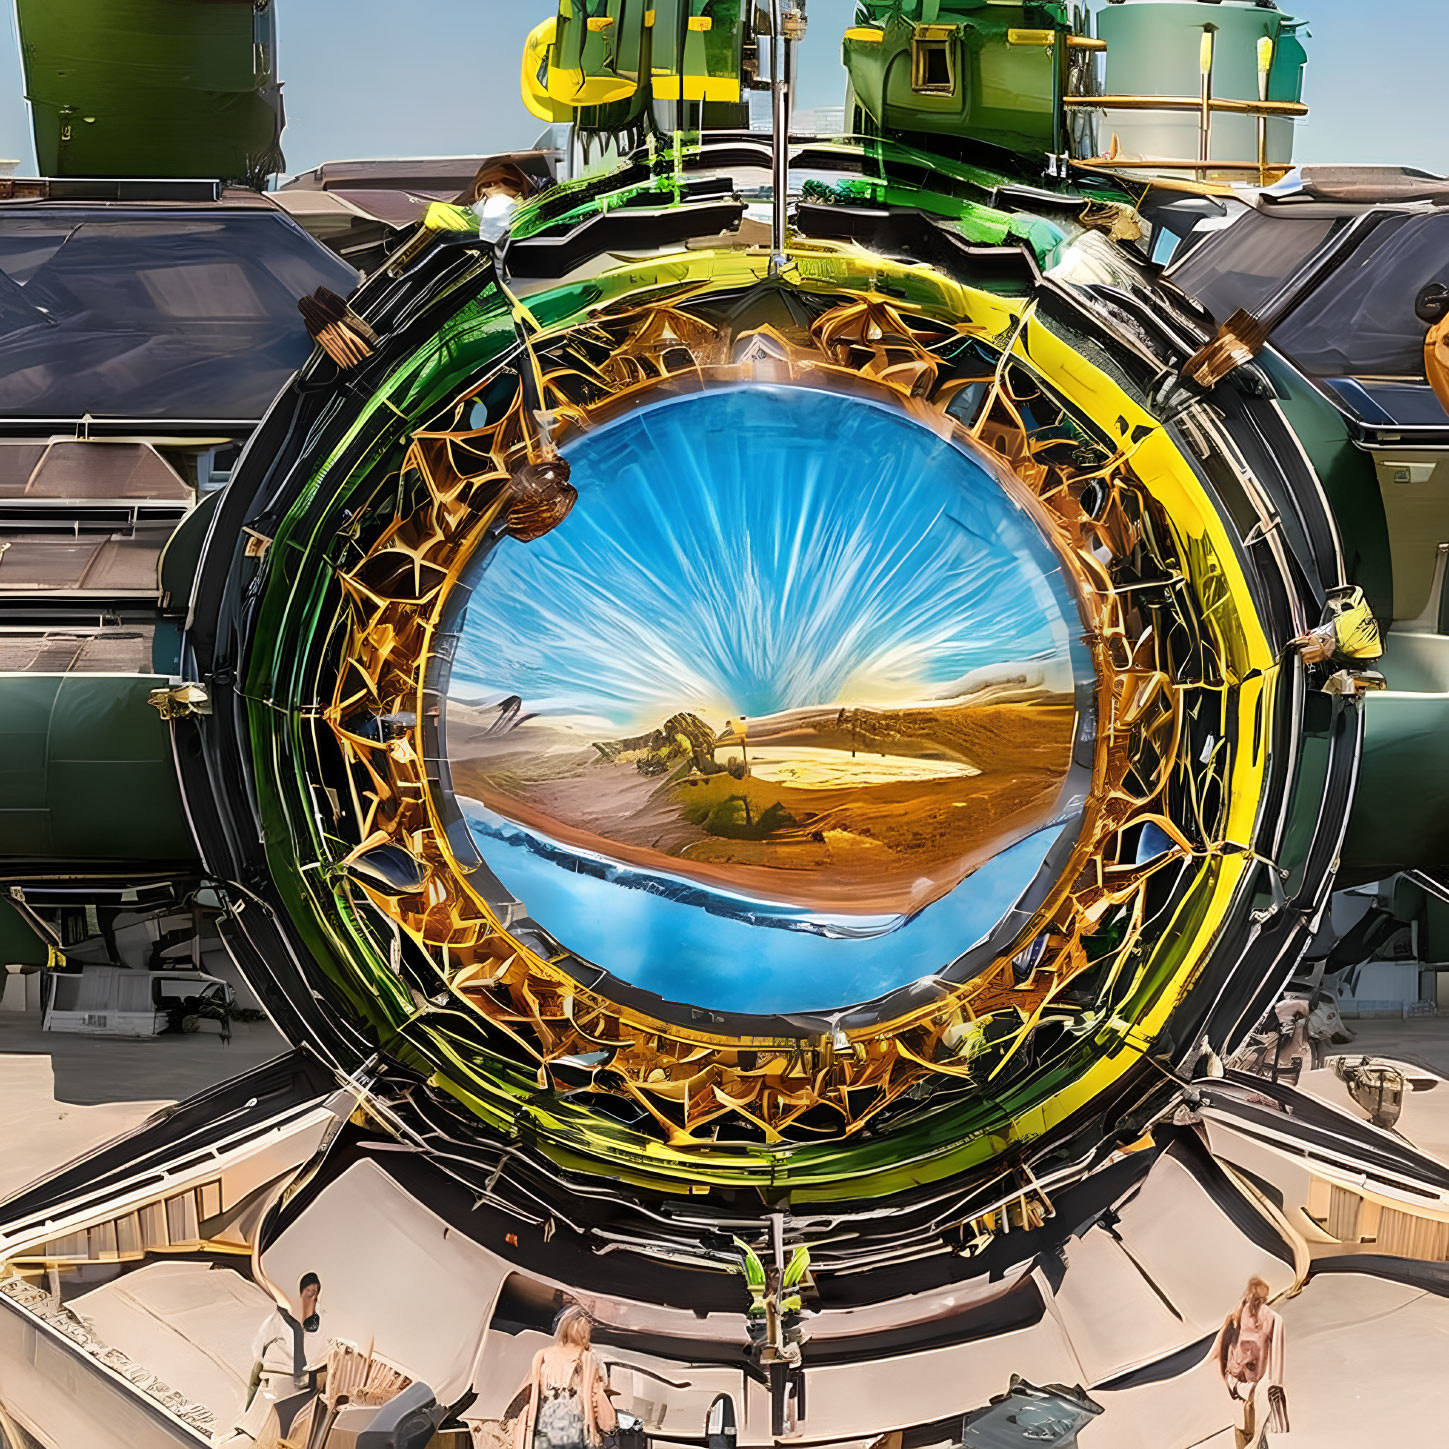 Futuristic portal overlooking desert landscape with machinery and observers